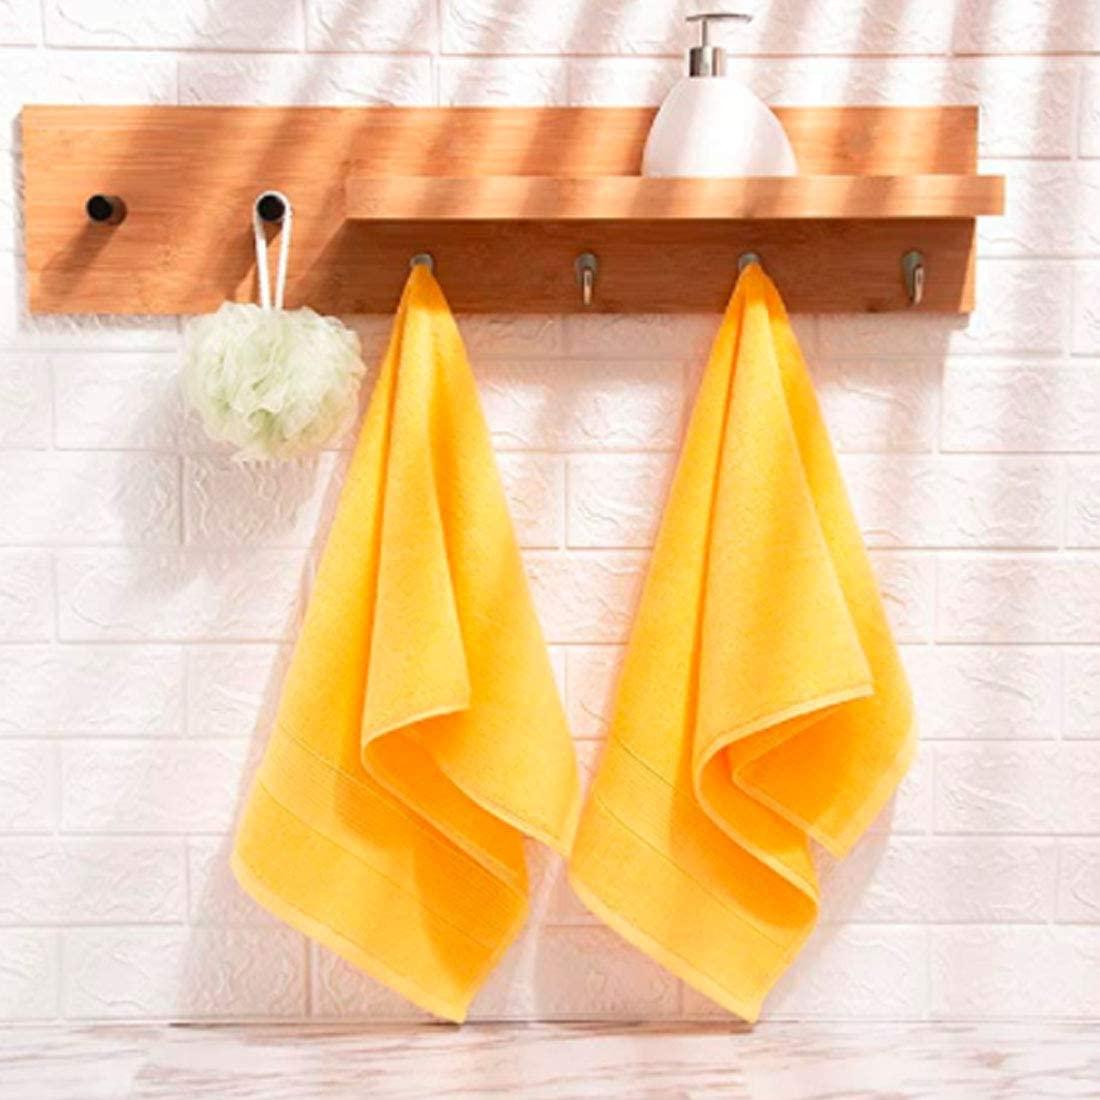 2-pack Cotton Terry Guest Towels - Light yellow - Home All